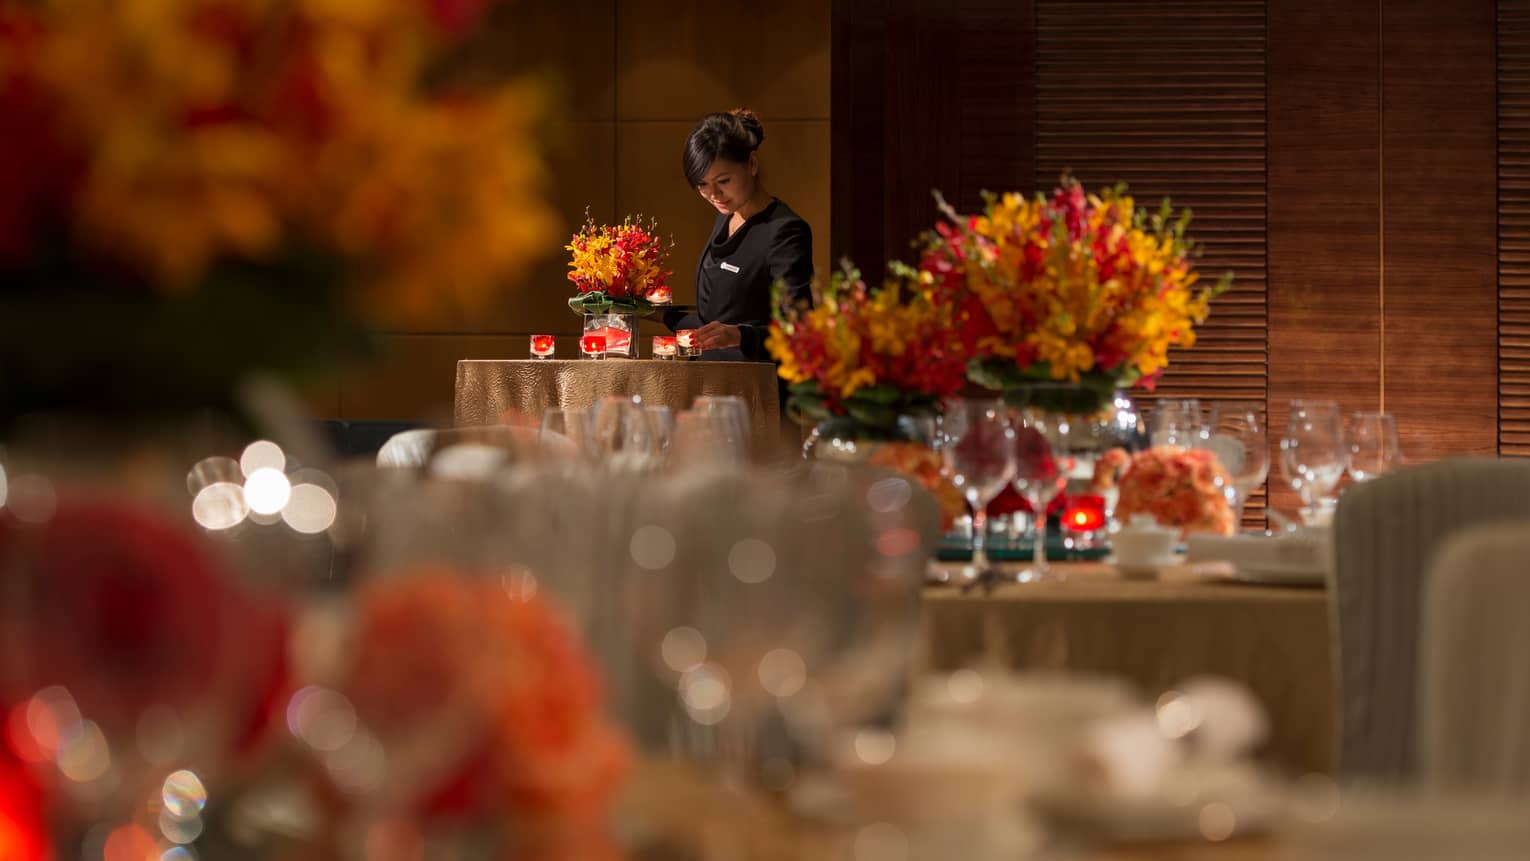 Hotel server in uniform places candles on table with orange flowers, linens, behind dining tables